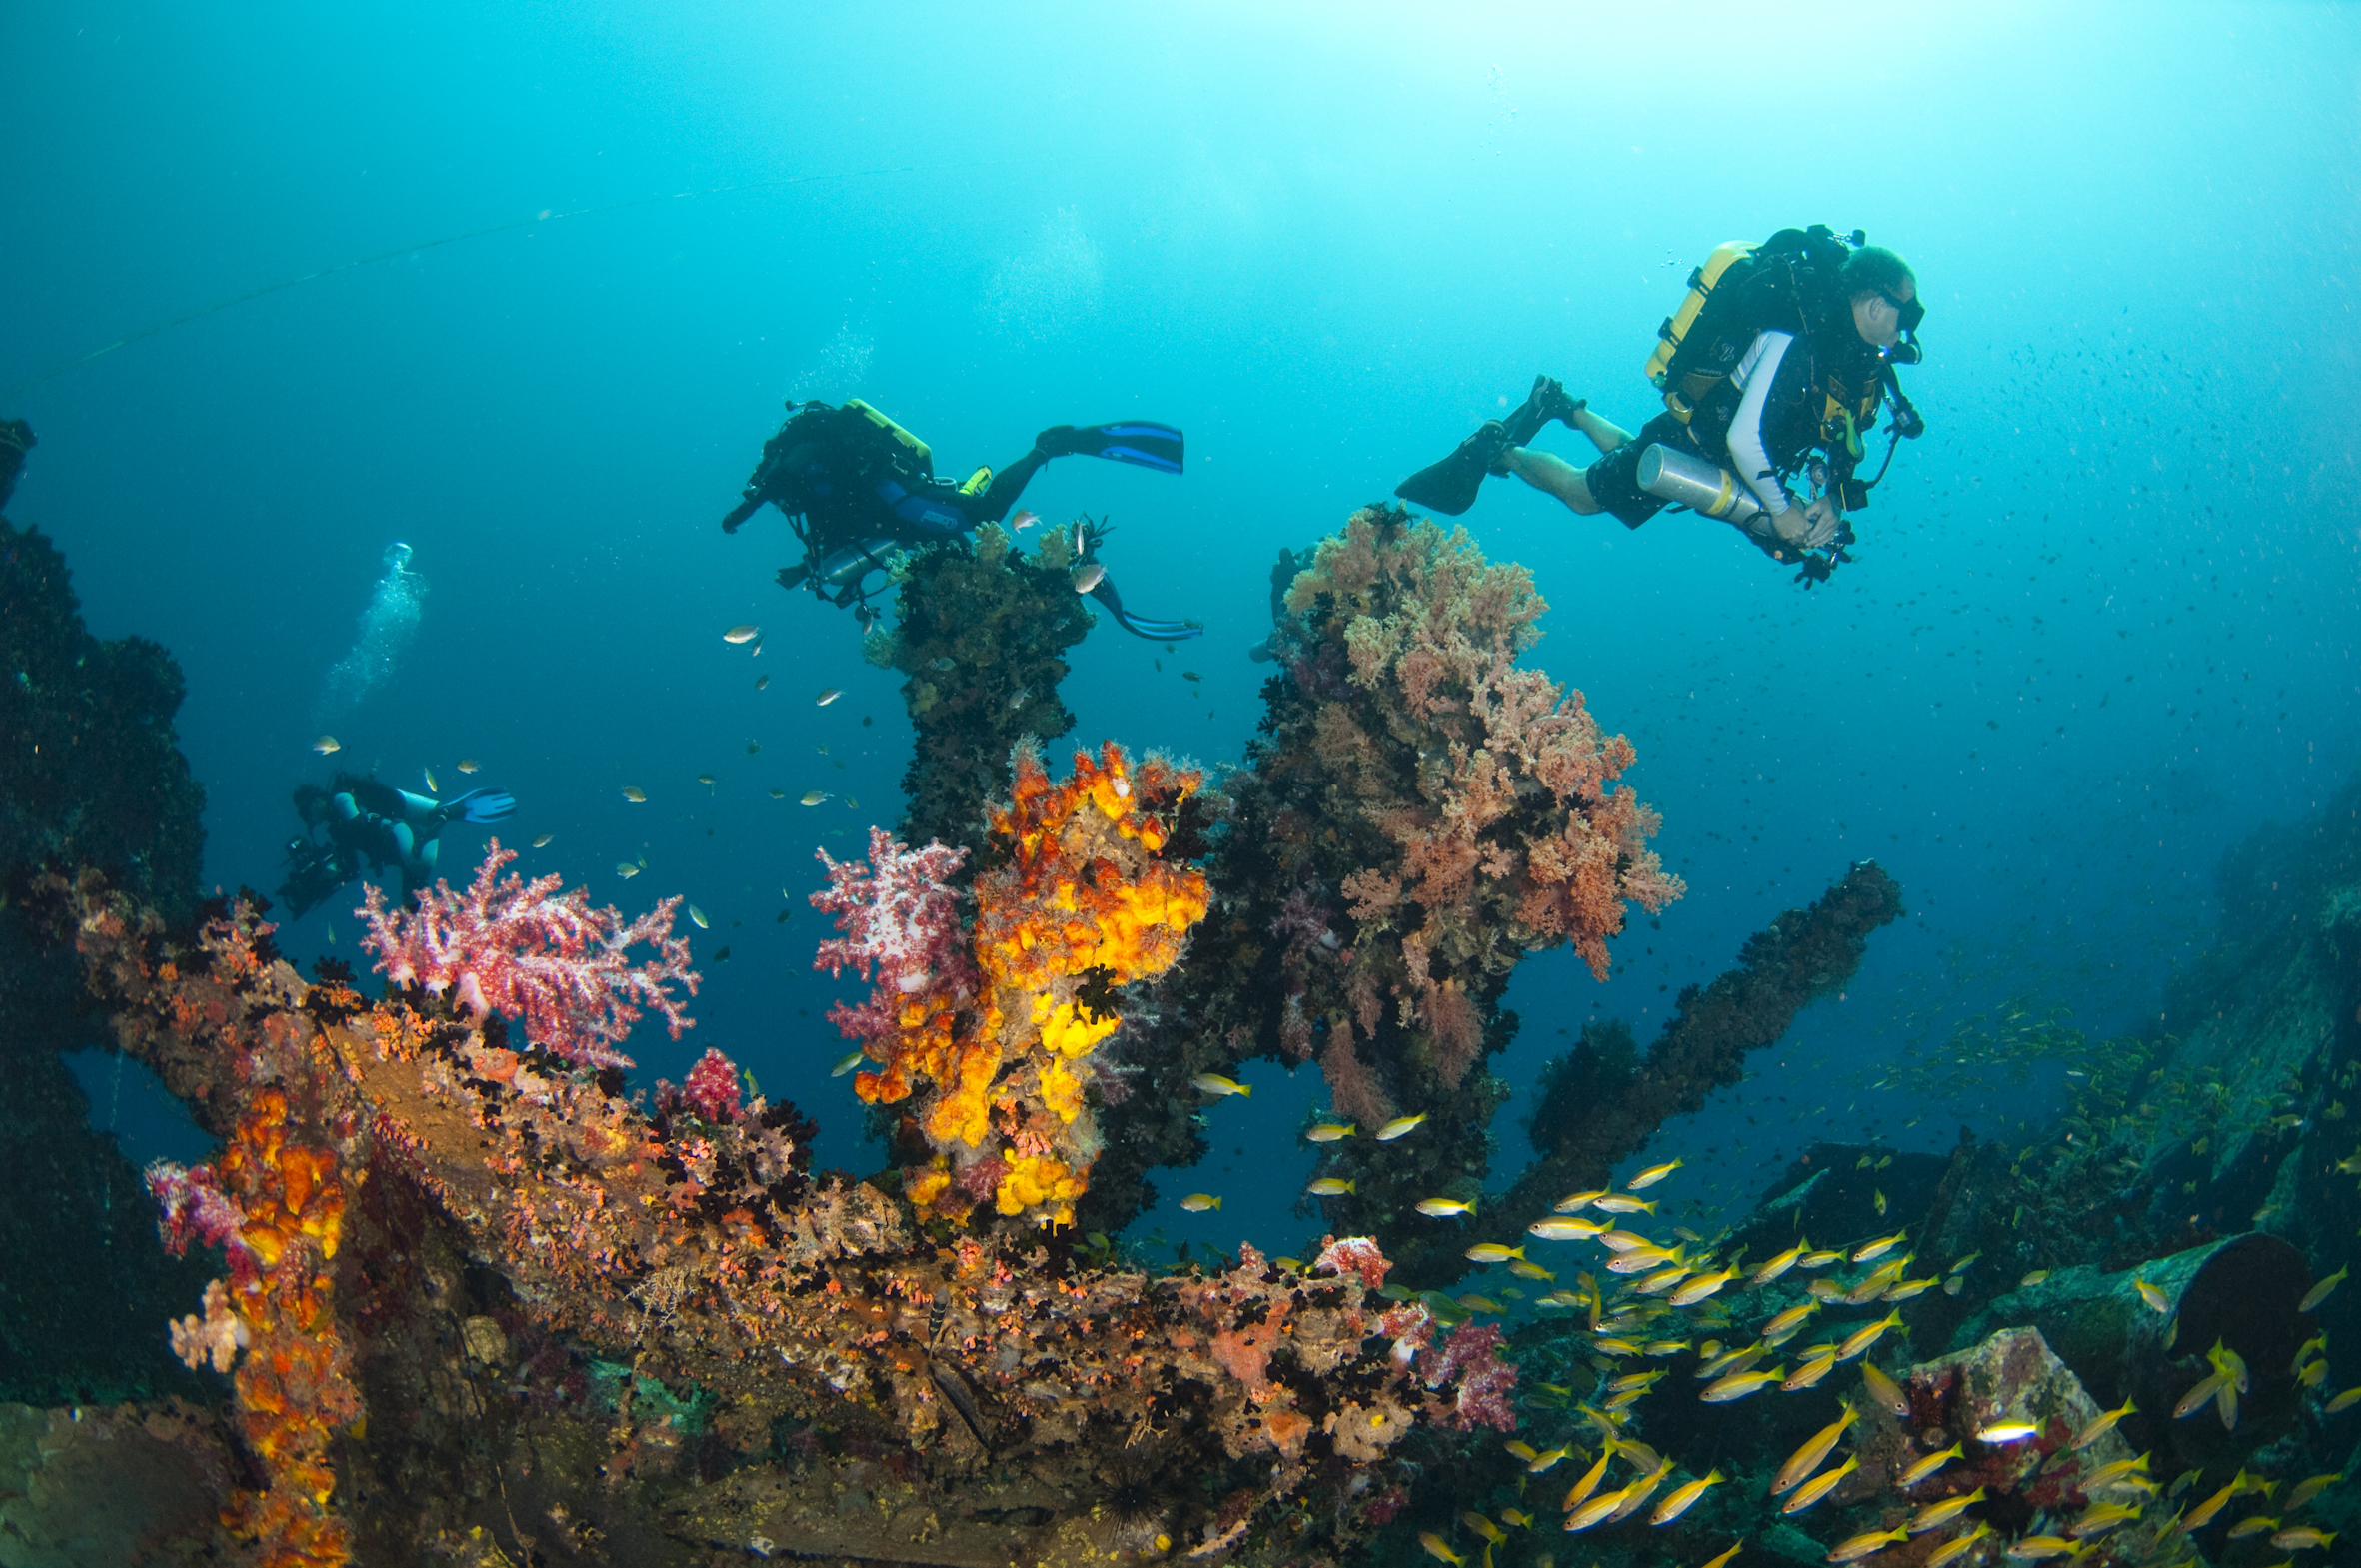 Divers at the Rice Bowl Wreck with school of Bigeye Snappers, Lutjanus lutjanus, and Soft Corals, Usukan Bay, Sabah, Malaysia